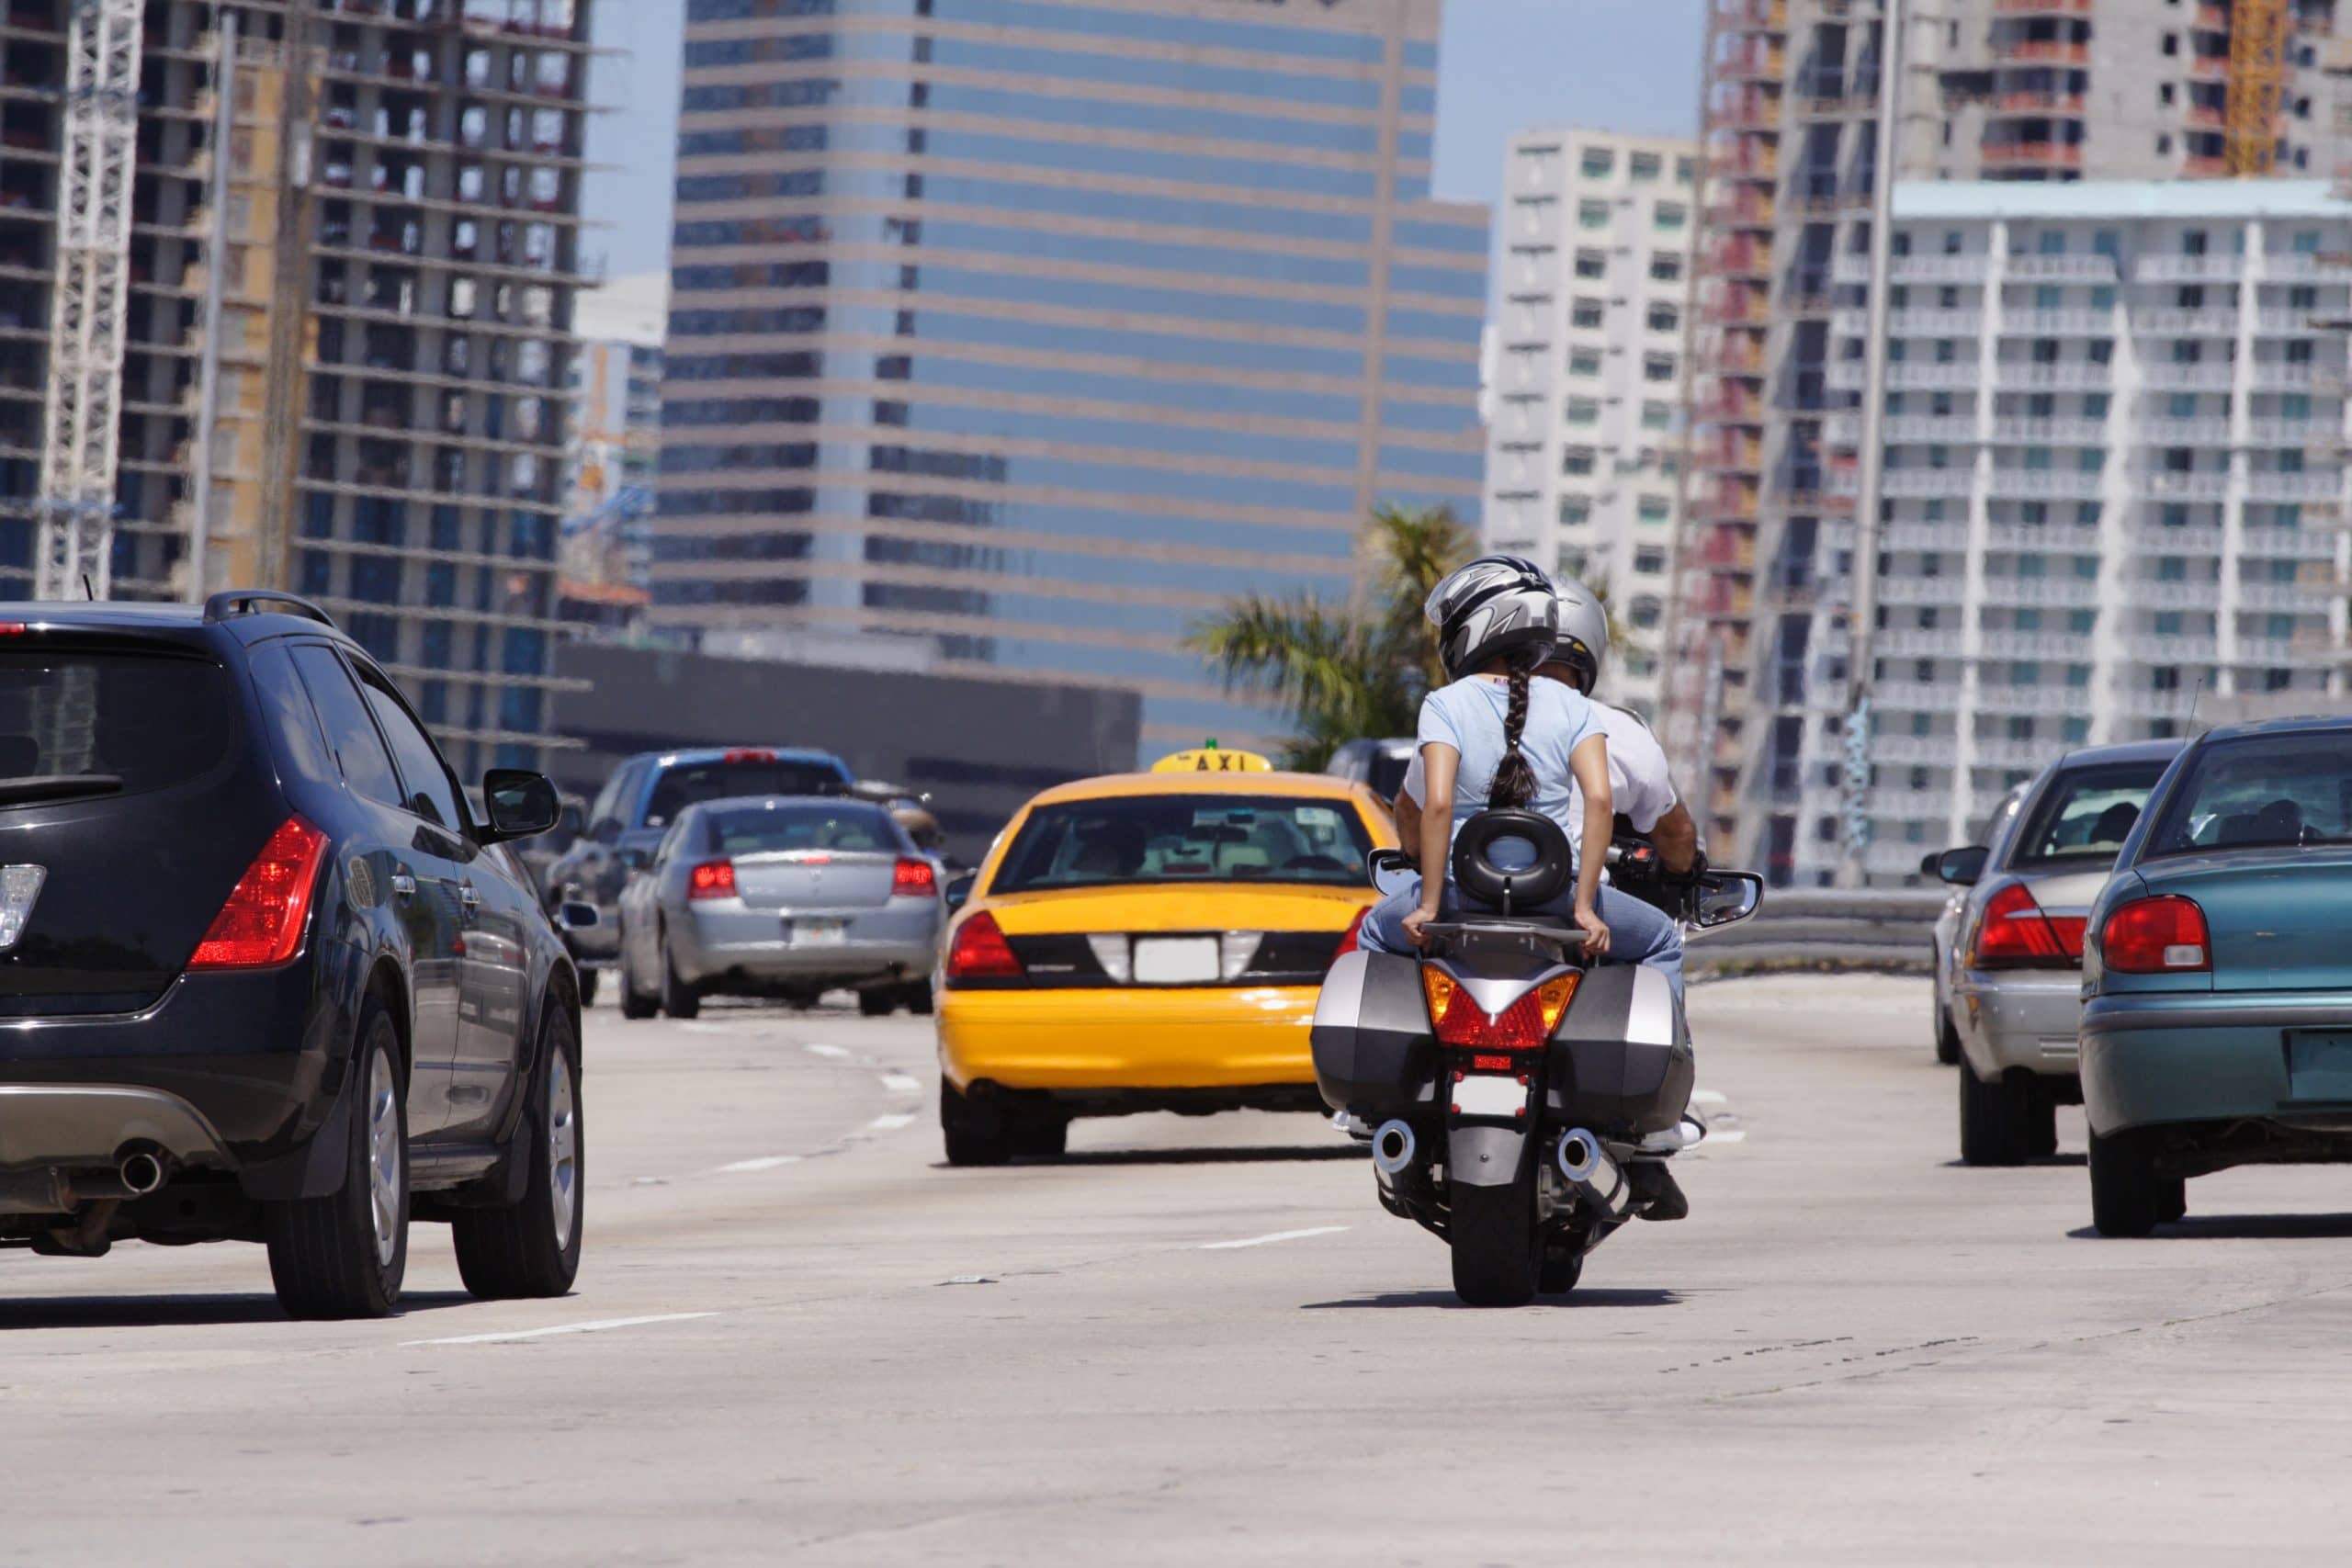 Motorcycle accident attorney in San Diego 